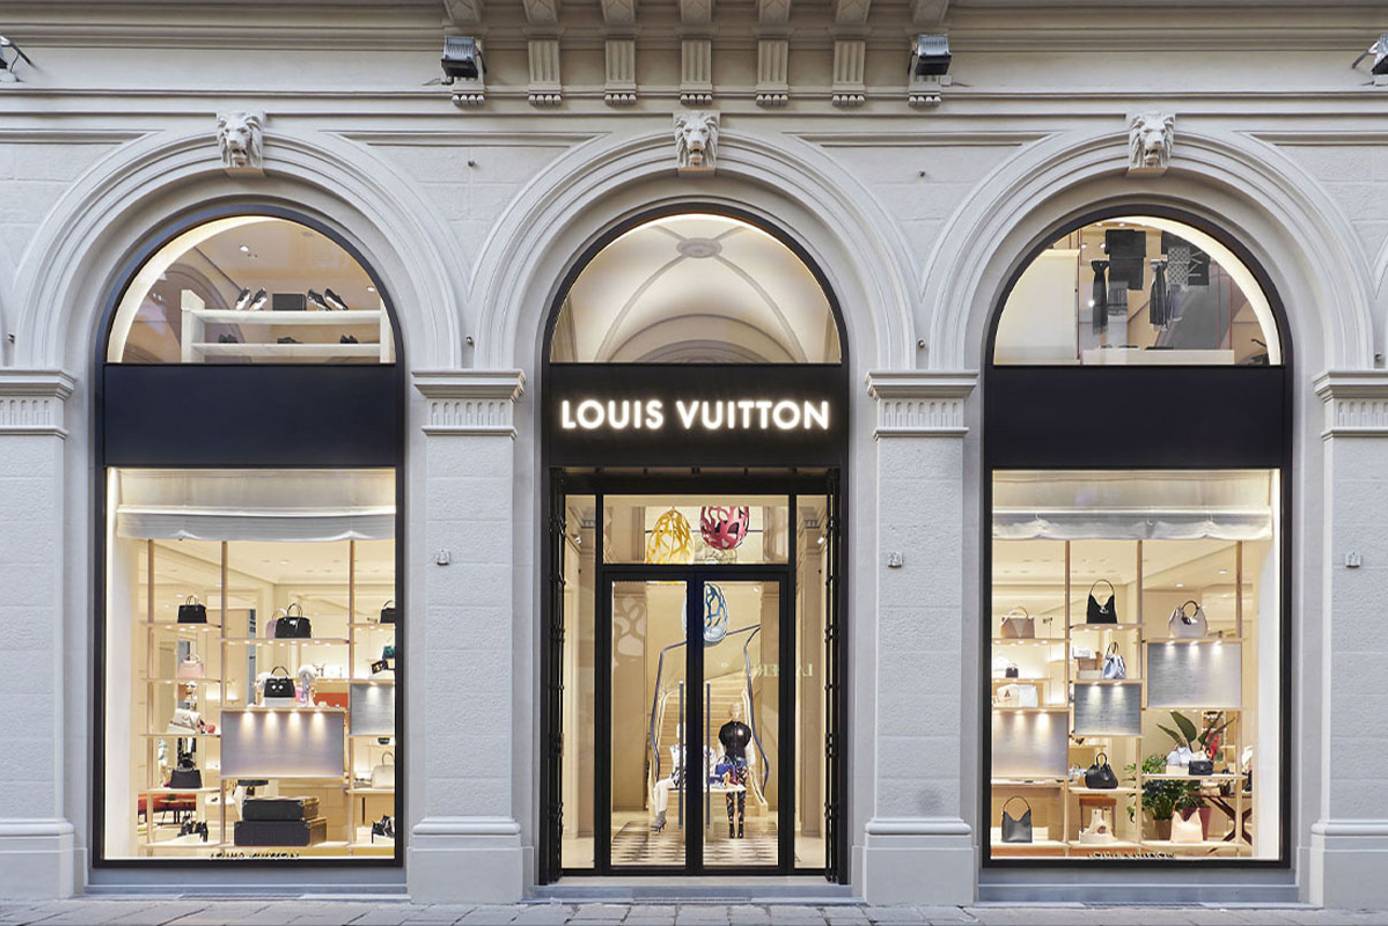 LVMH To Acquire Richemont, Cartier: Report